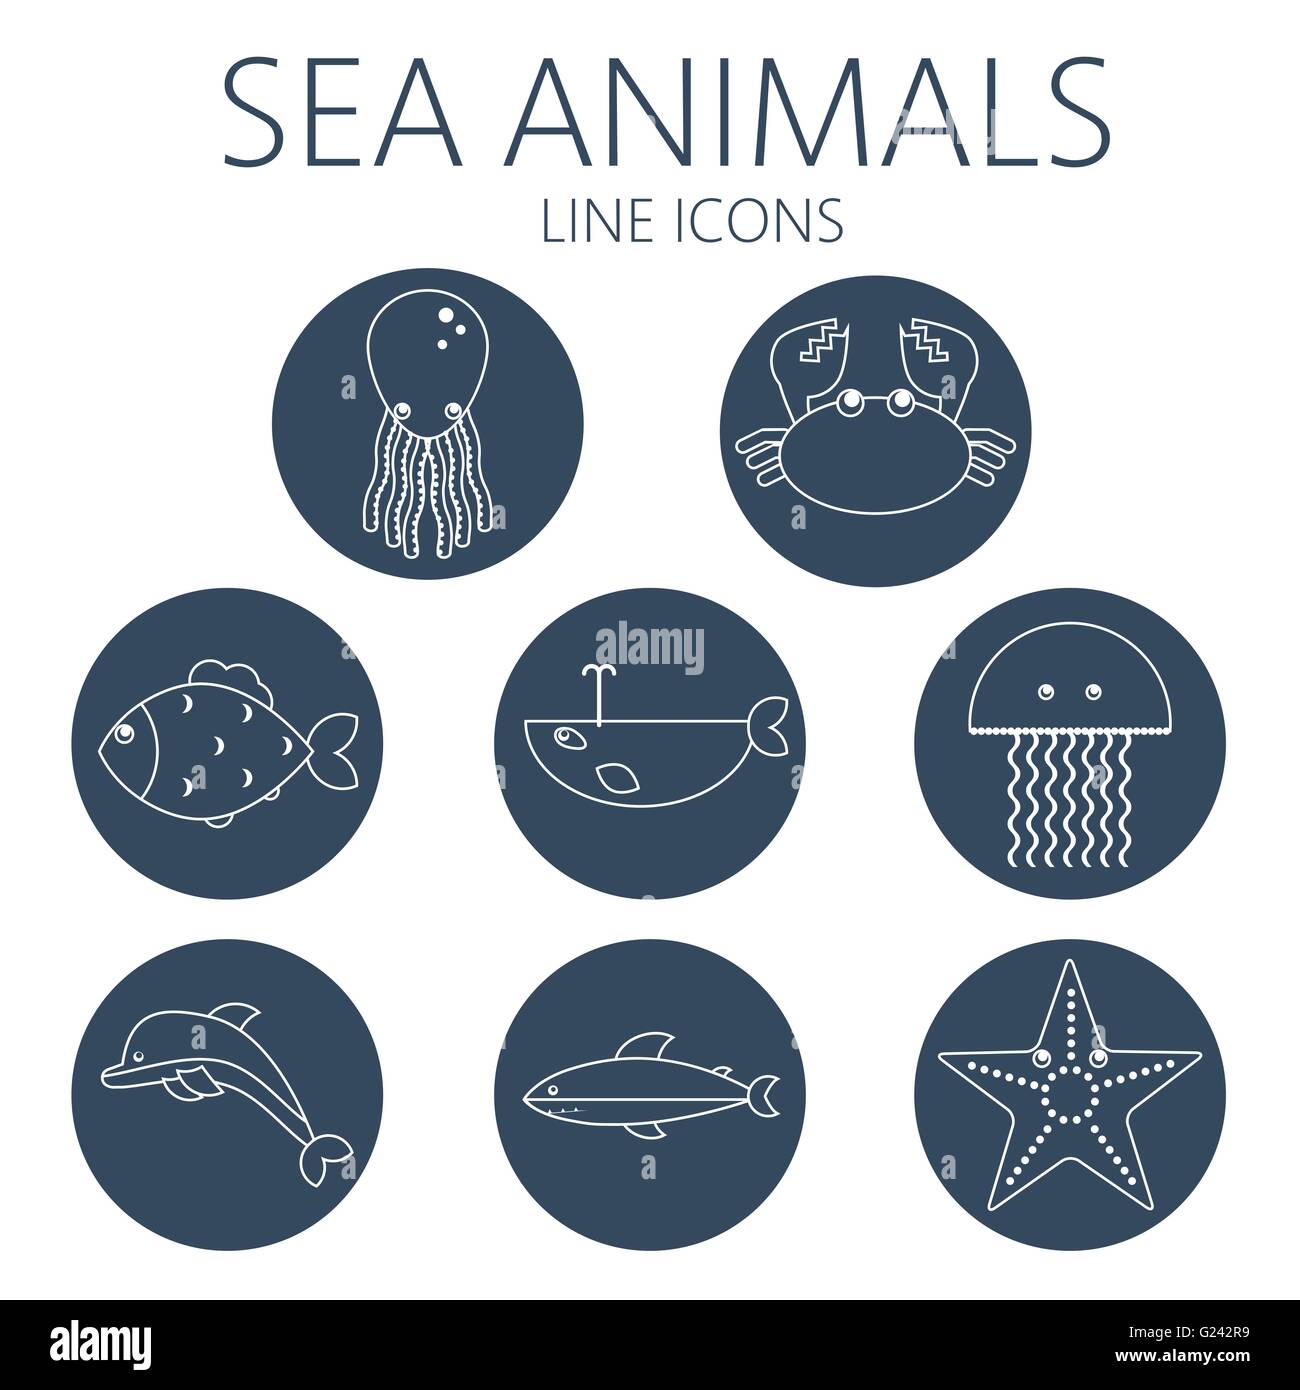 Black sea animal set in outlines with octopus, crab, fish, penguin, shark, whale, jellyfish and starfish. Digital vector image. Stock Vector